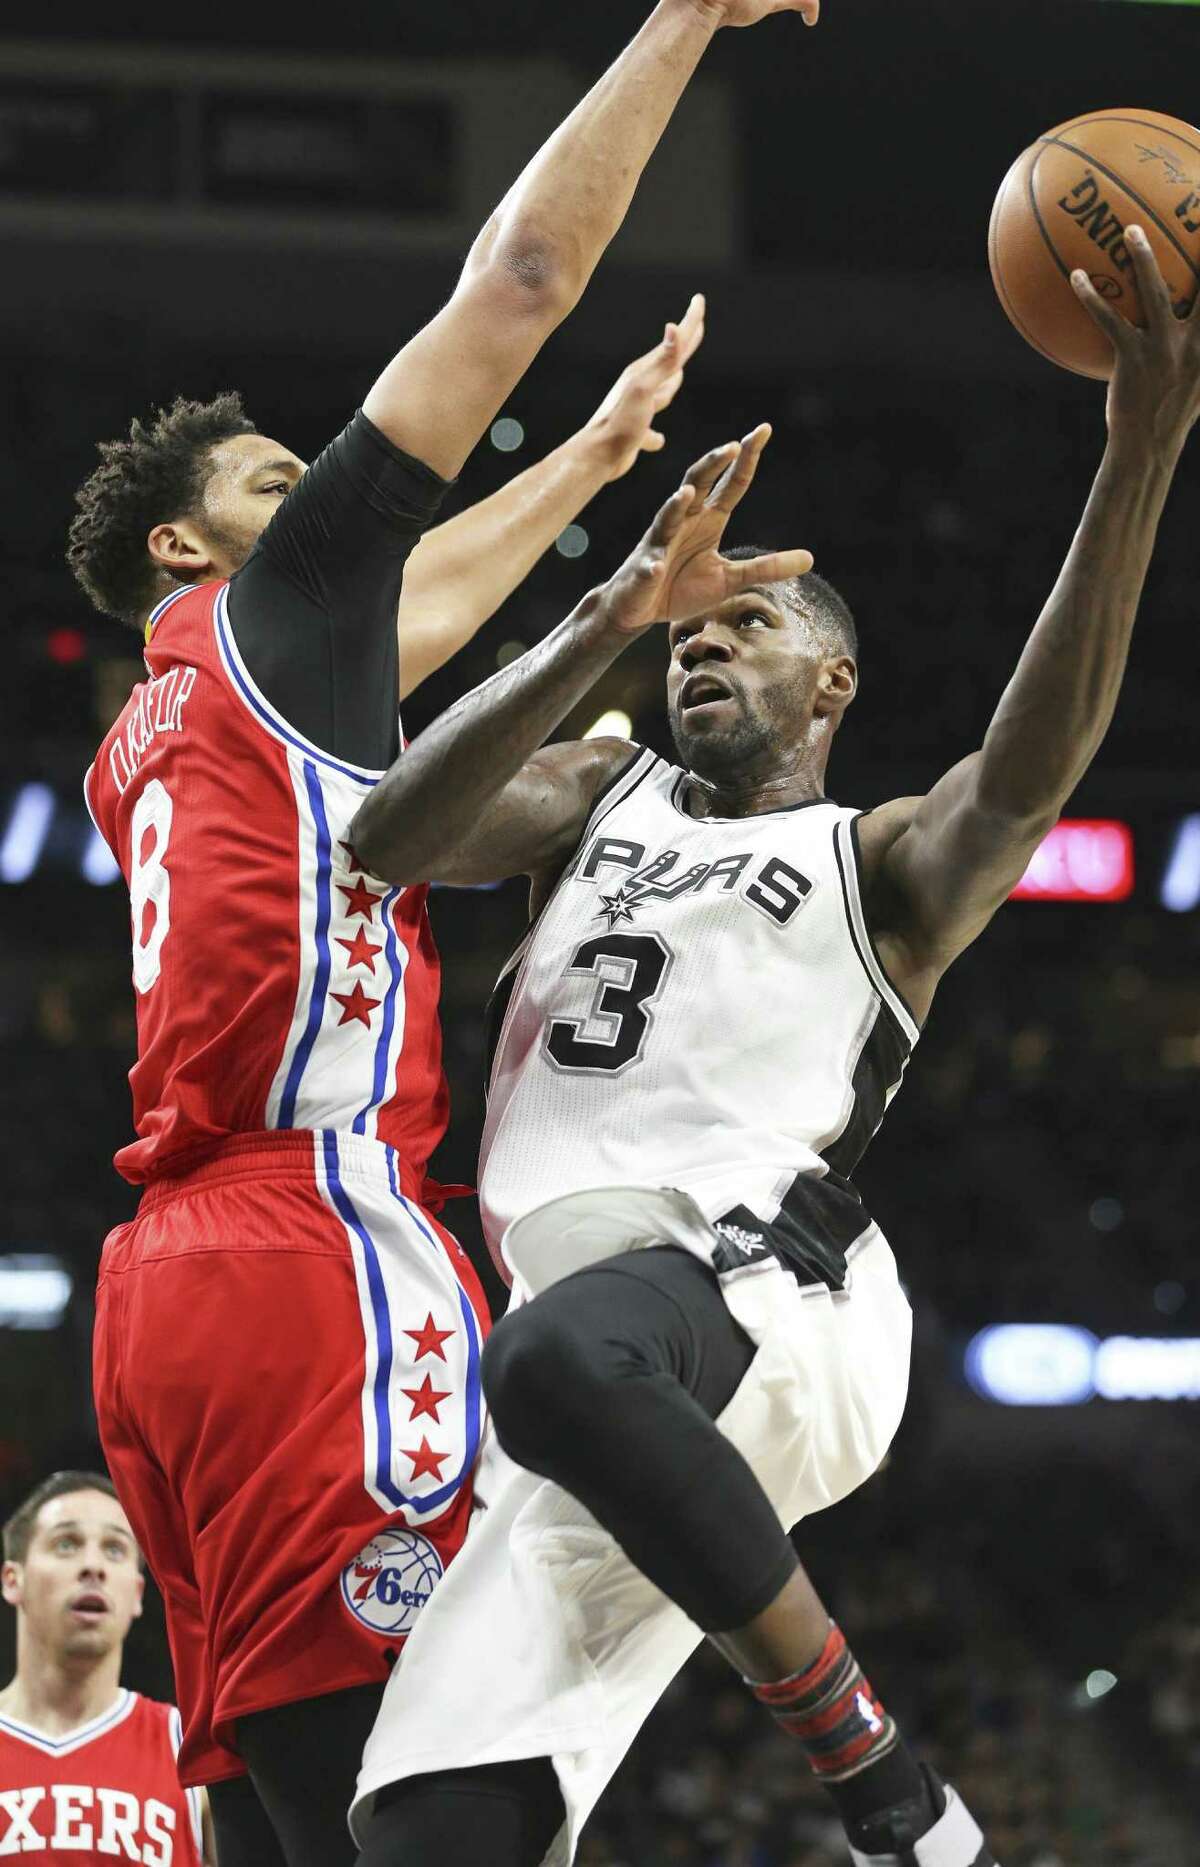 Dwayne Dedman leans up for a shot against Jahlil Okafor as the Spurs host the Sixers at the AT&T Center on February 2, 2017.